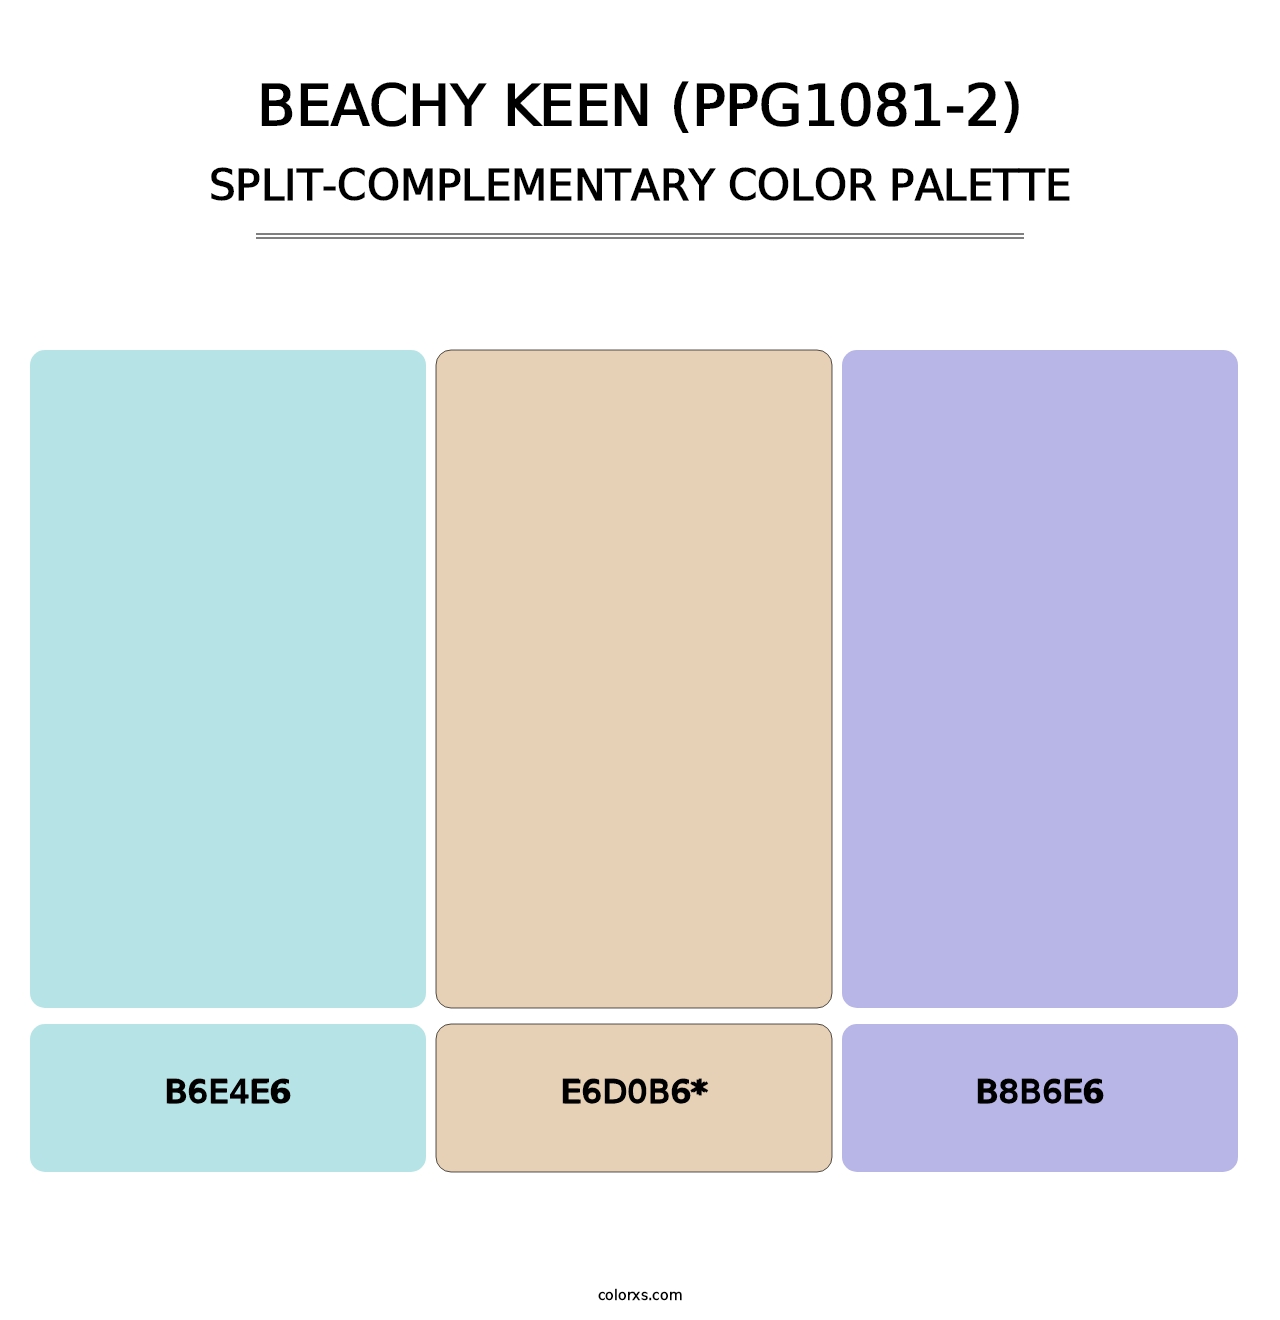 Beachy Keen (PPG1081-2) - Split-Complementary Color Palette